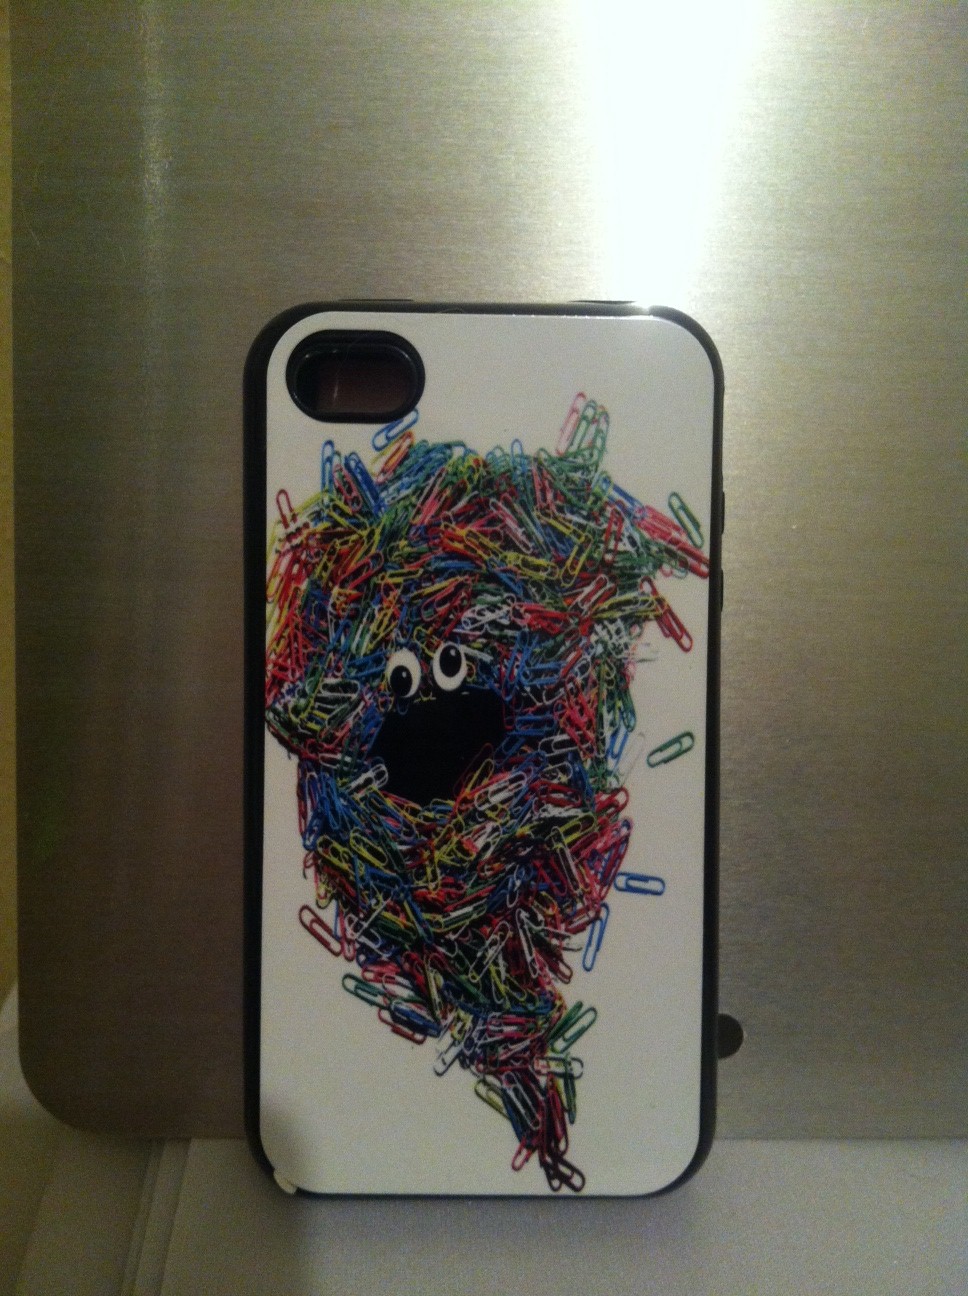 Paper Clip Iphone Caes made with sublimation printing